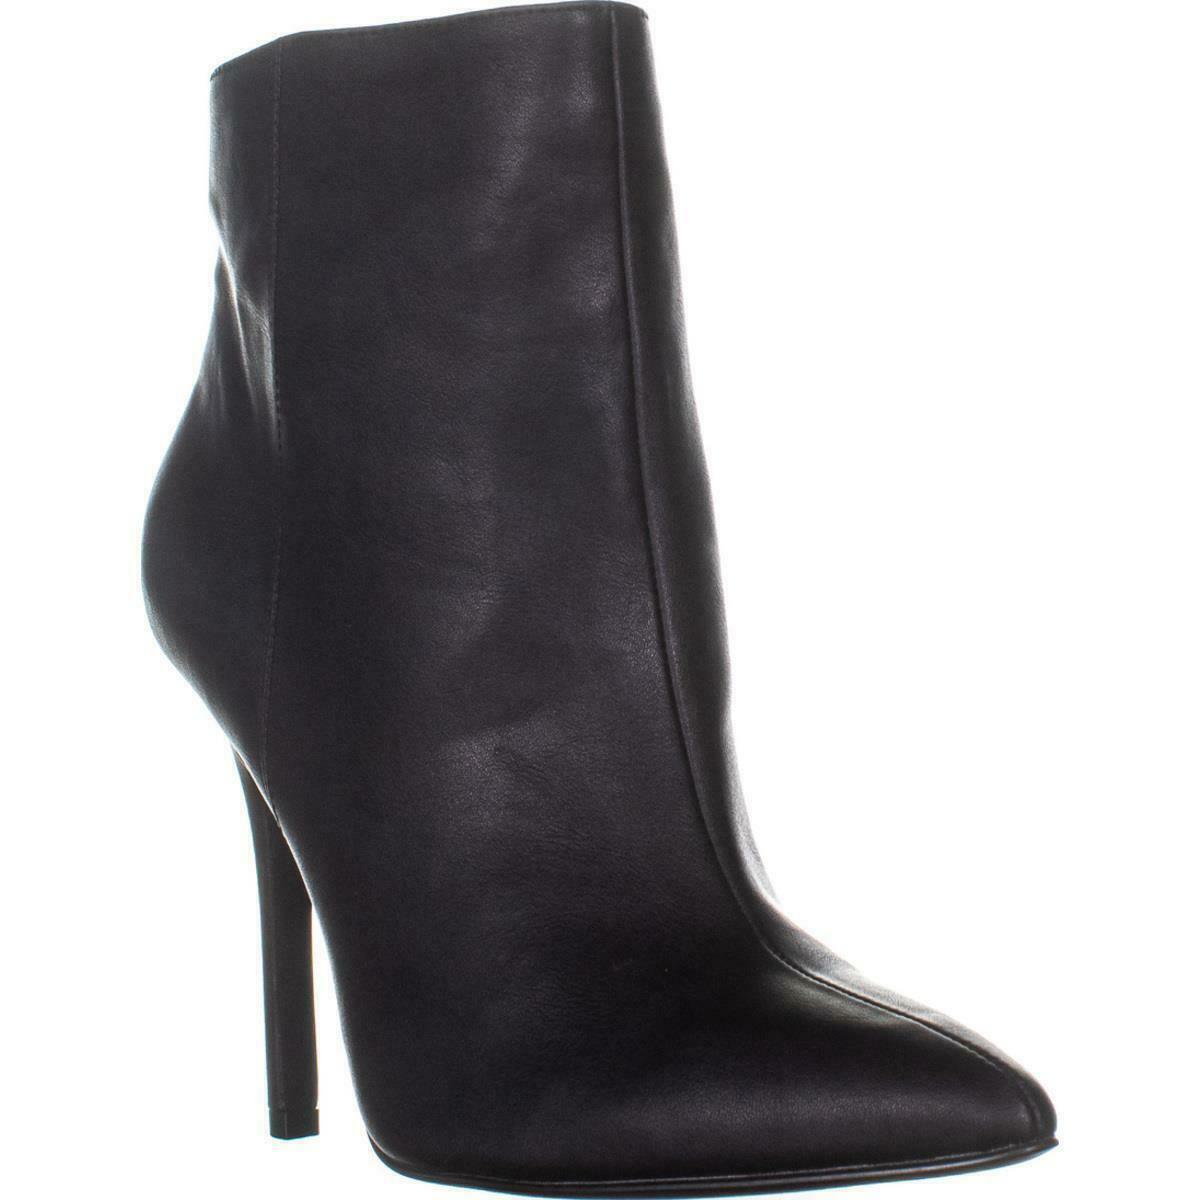 Charles by Charles David Delicious 2 Ankle Boots, Black Smooth - Boots